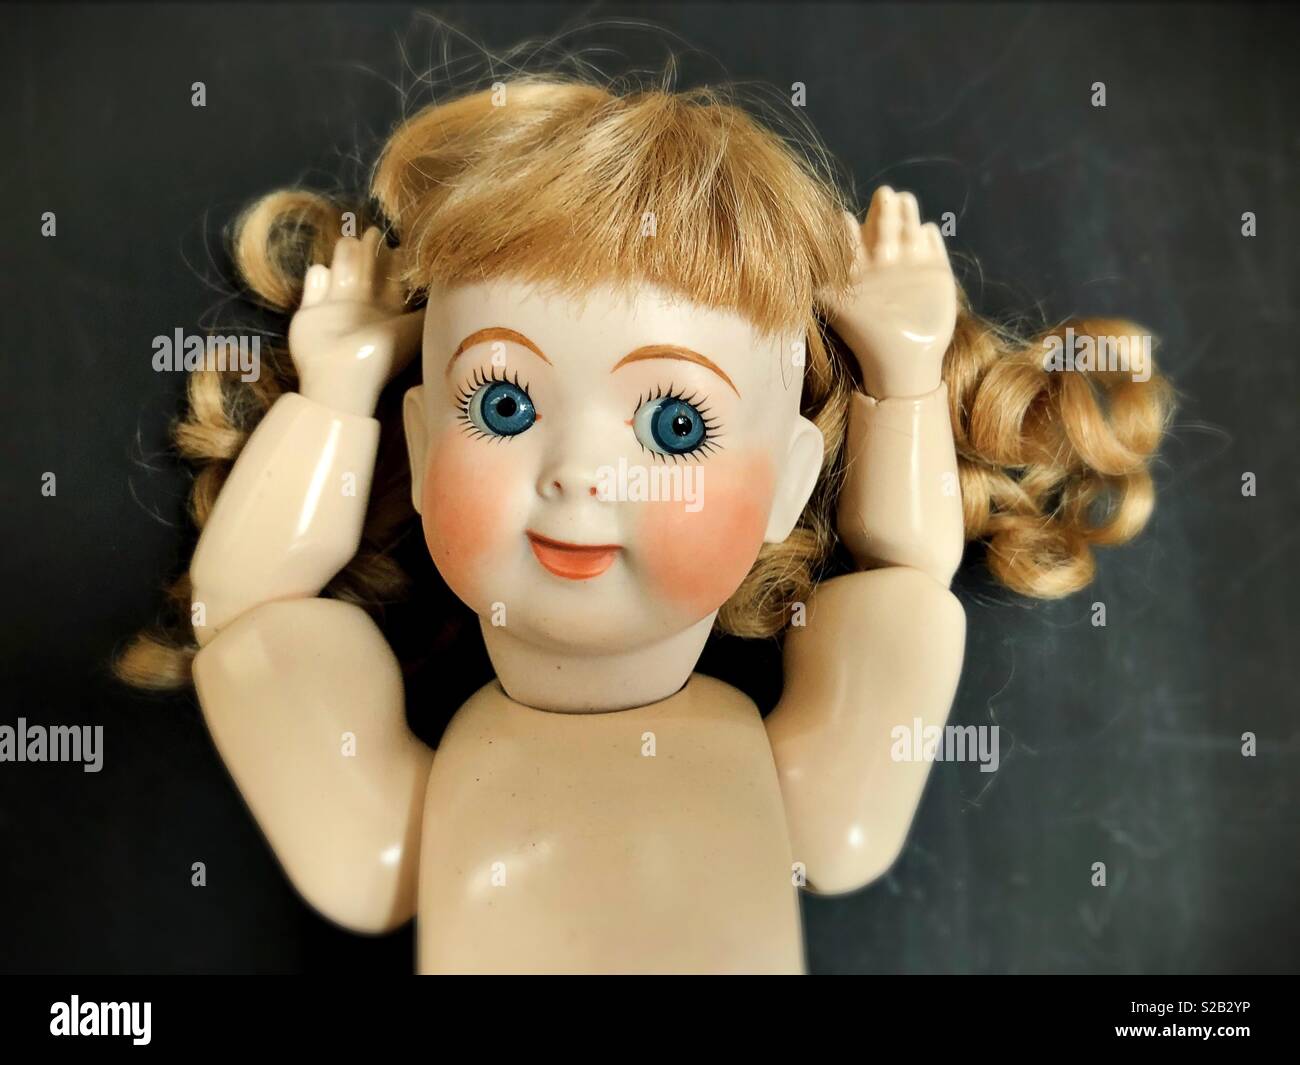 Doll with arms raised. Stock Photo